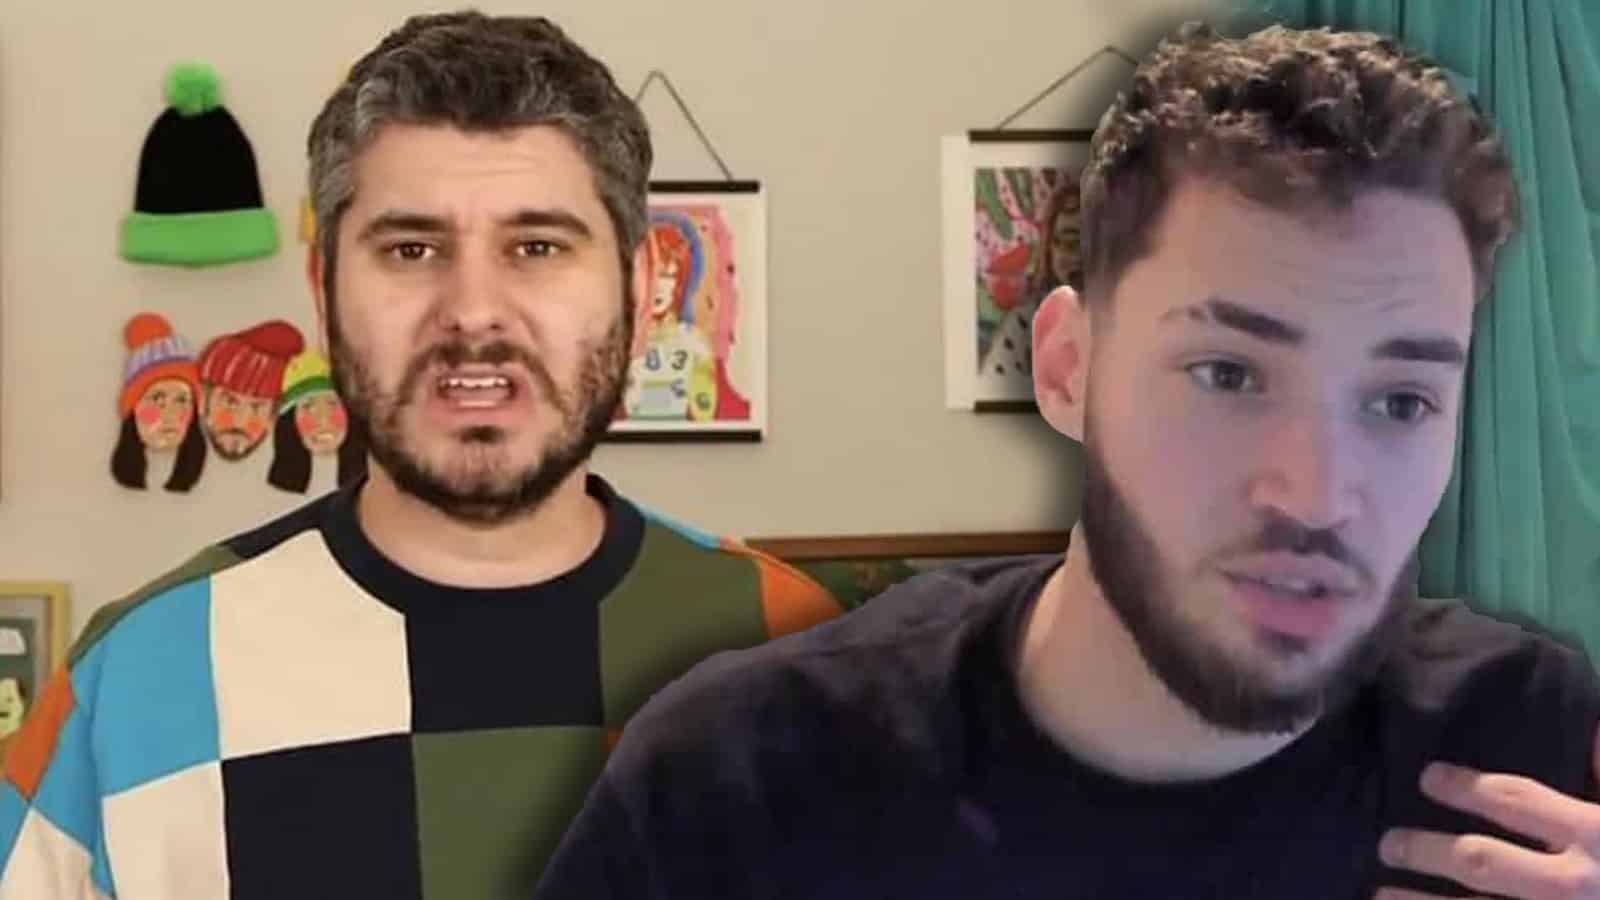 h3h3 rejoins Twitch, and he's already flaming Adin Ross, Trainwrecks, and more